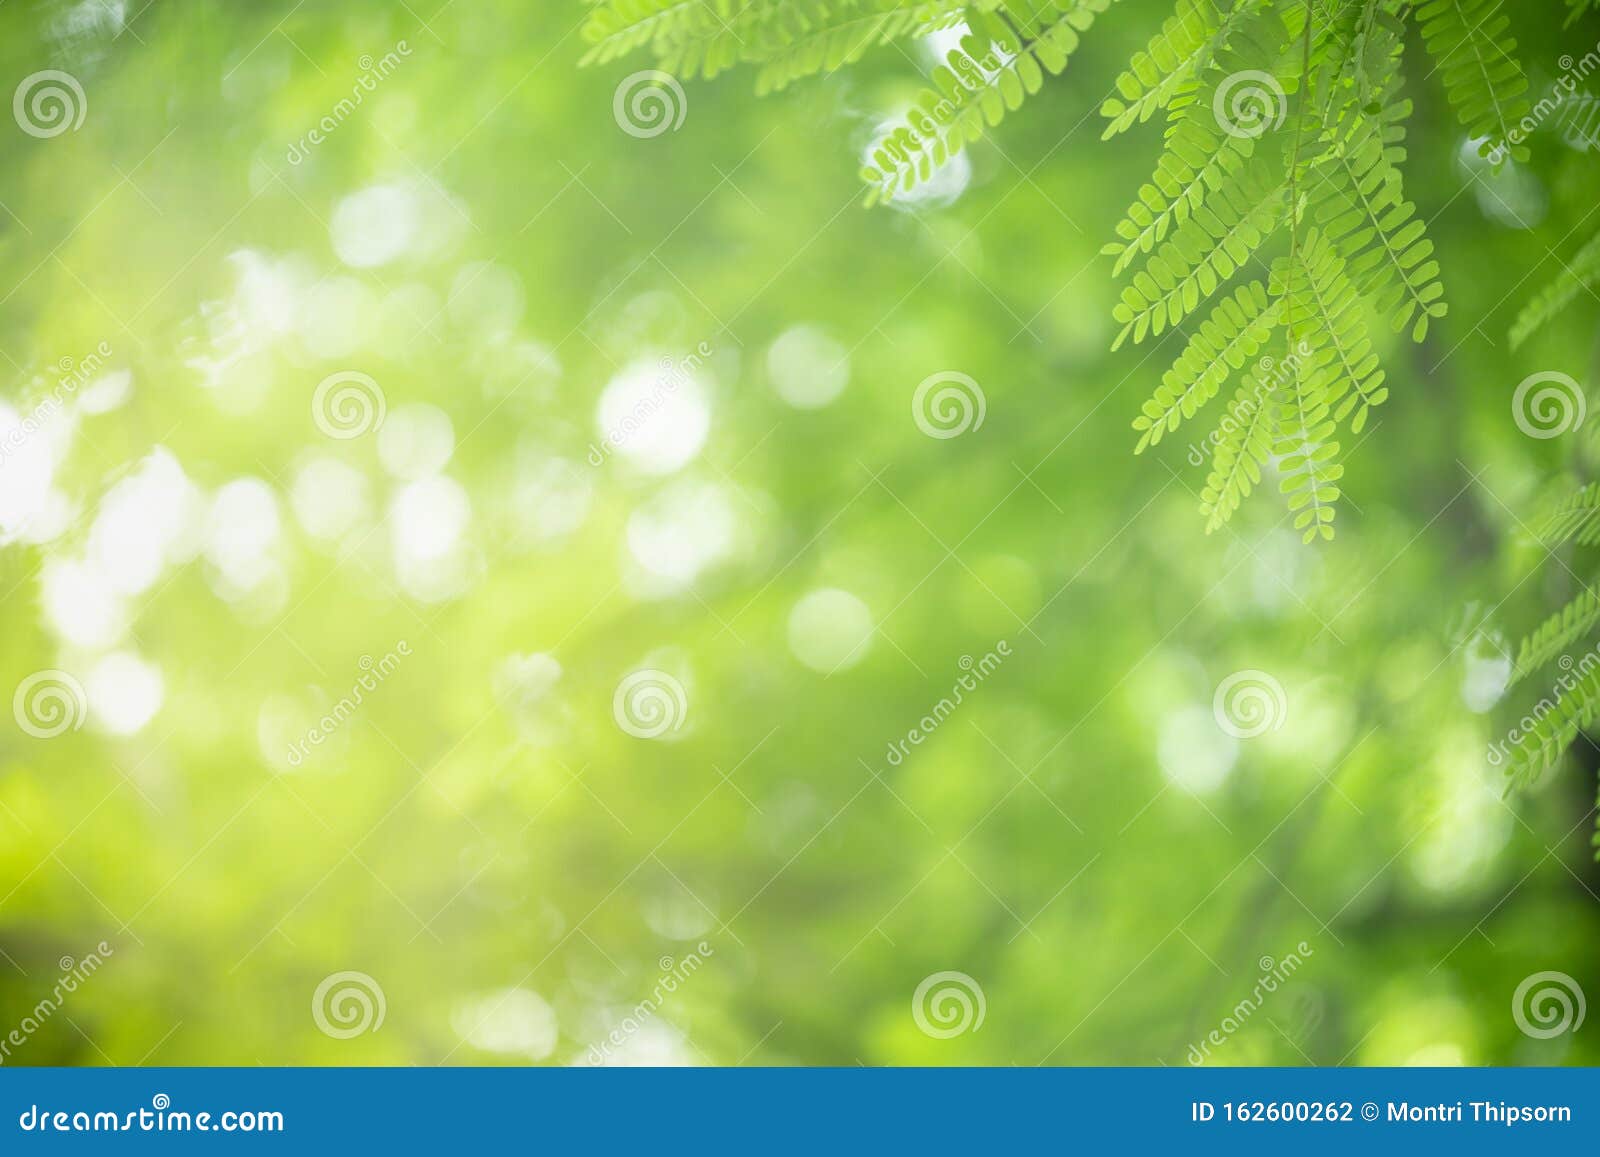 Greenery Photos Download The BEST Free Greenery Stock Photos  HD Images